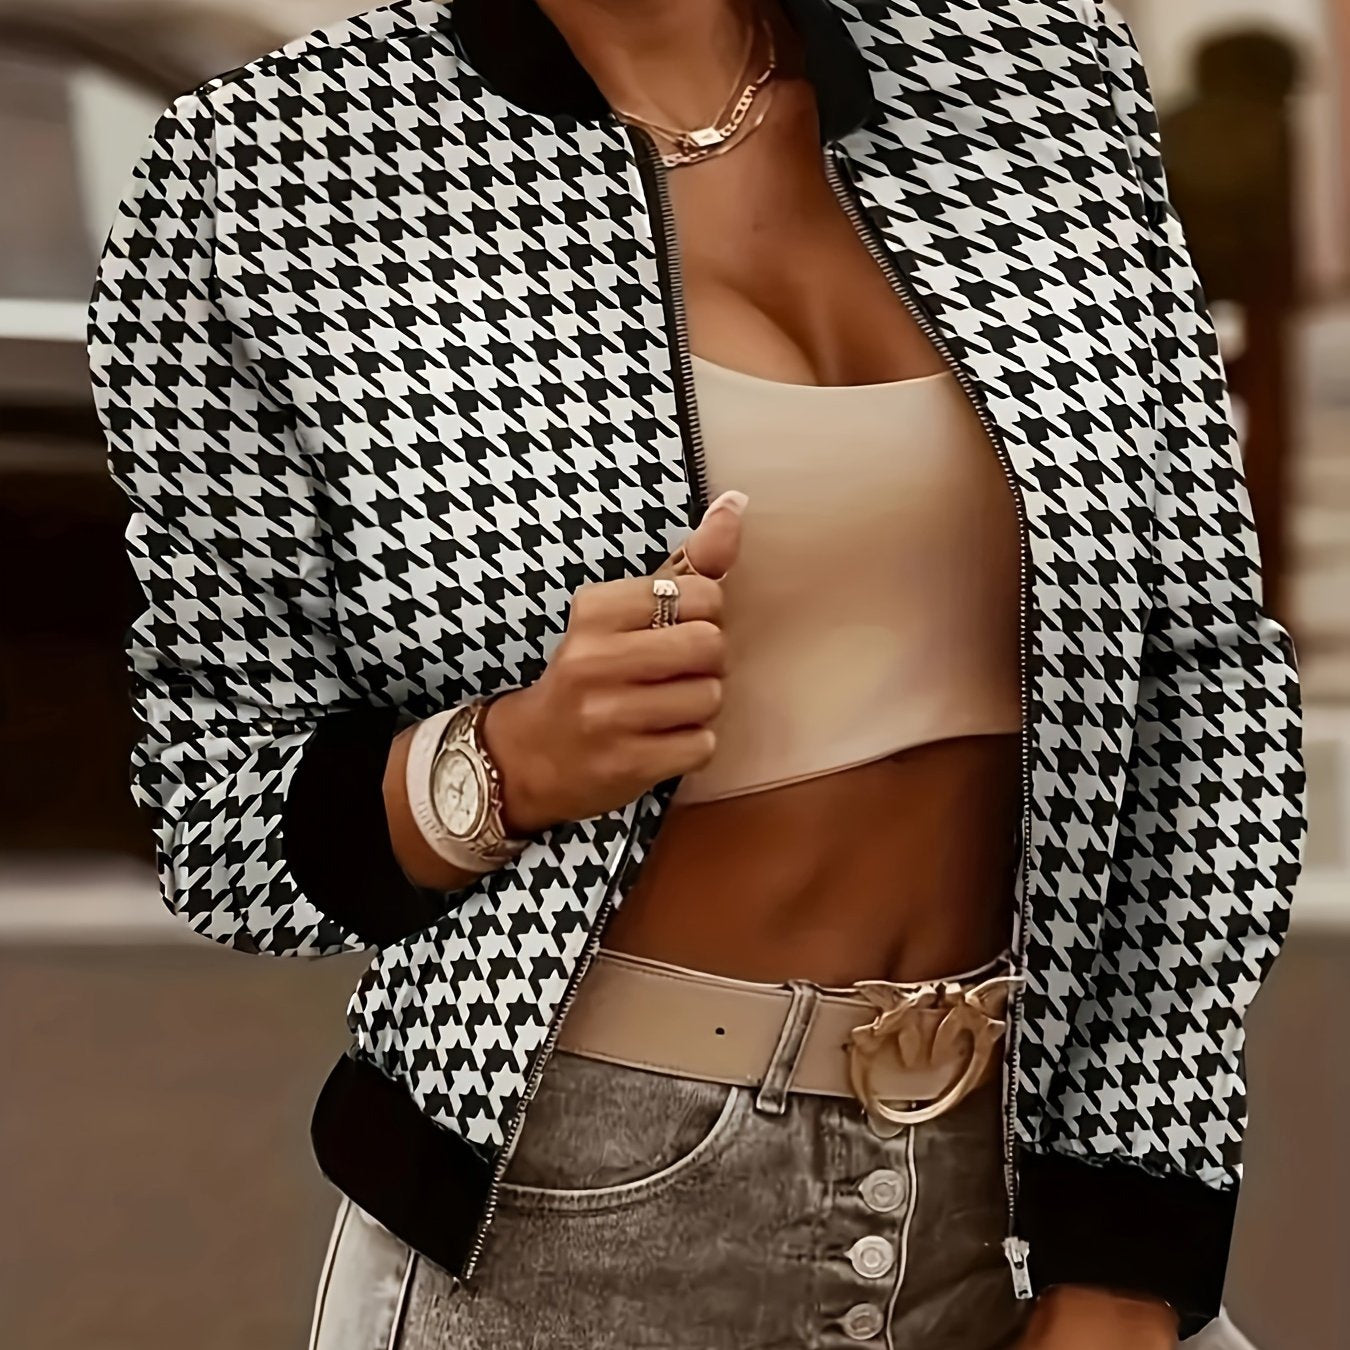 Antmvs Houndstooth Print Bomber Jacket, Casual Zip Up Long Sleeve Outerwear, Women's Clothing